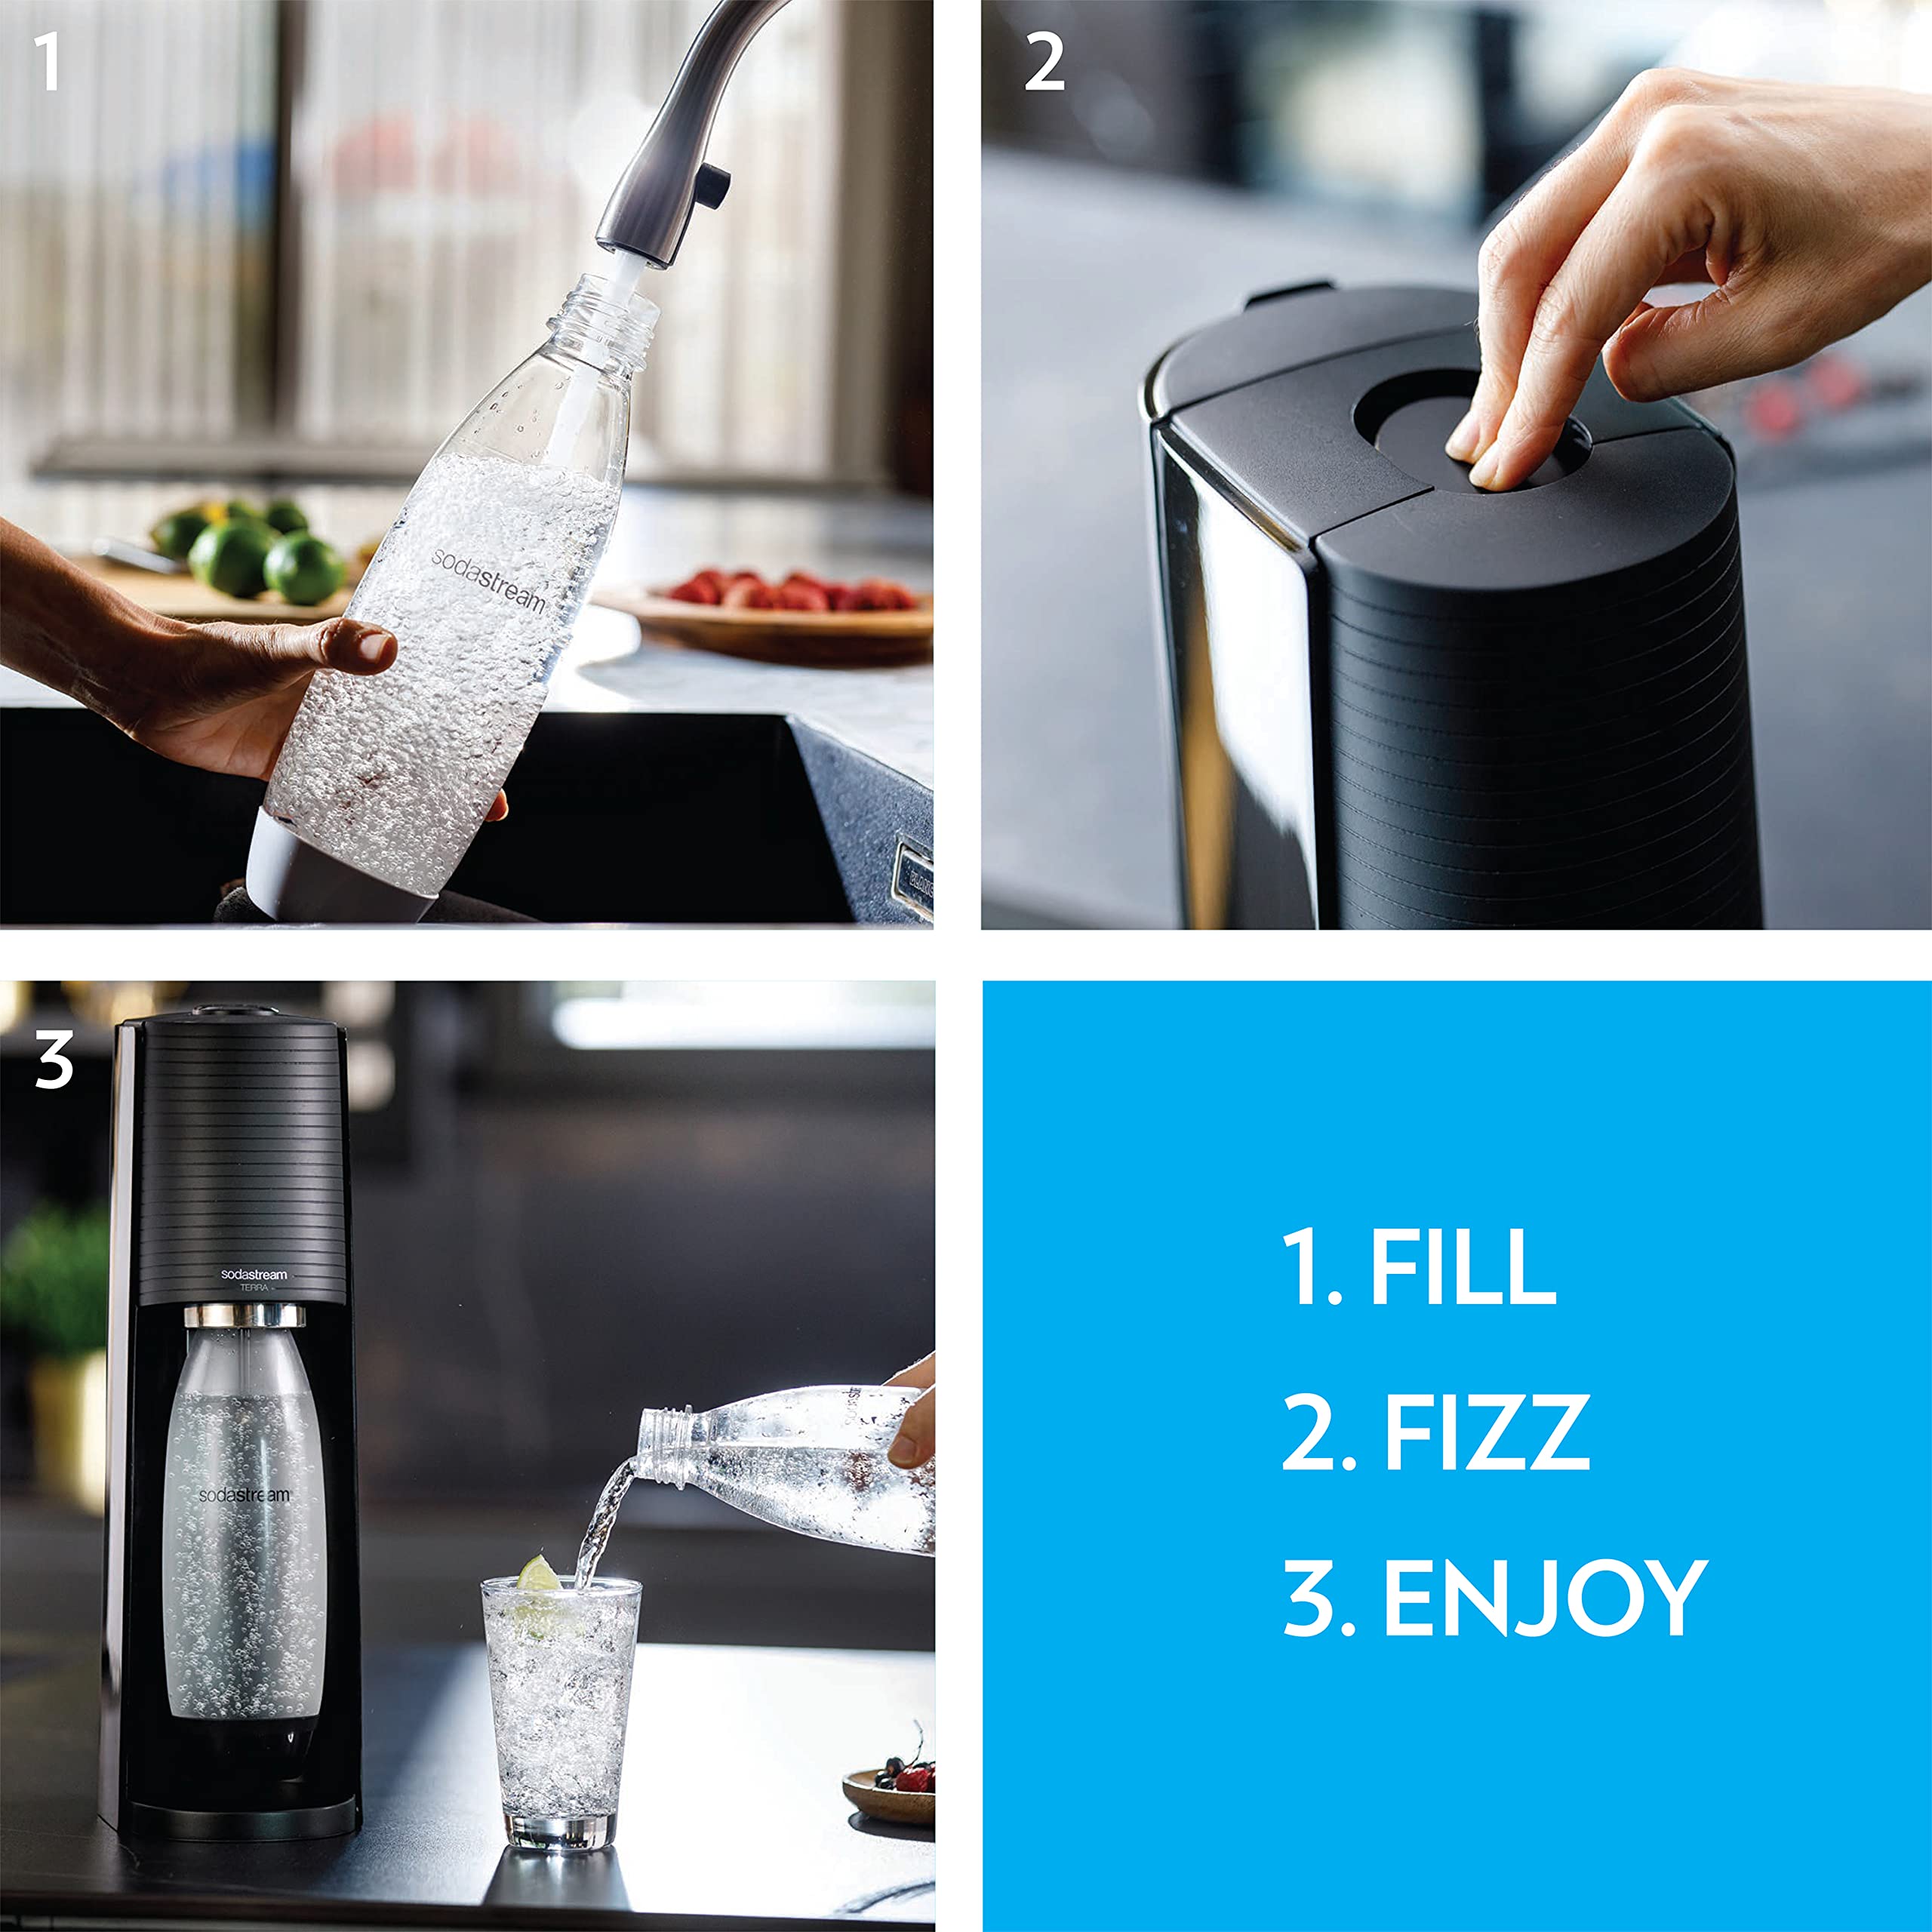 SodaStream Terra Sparkling Water Maker (Black) with CO2 and DWS Bottle